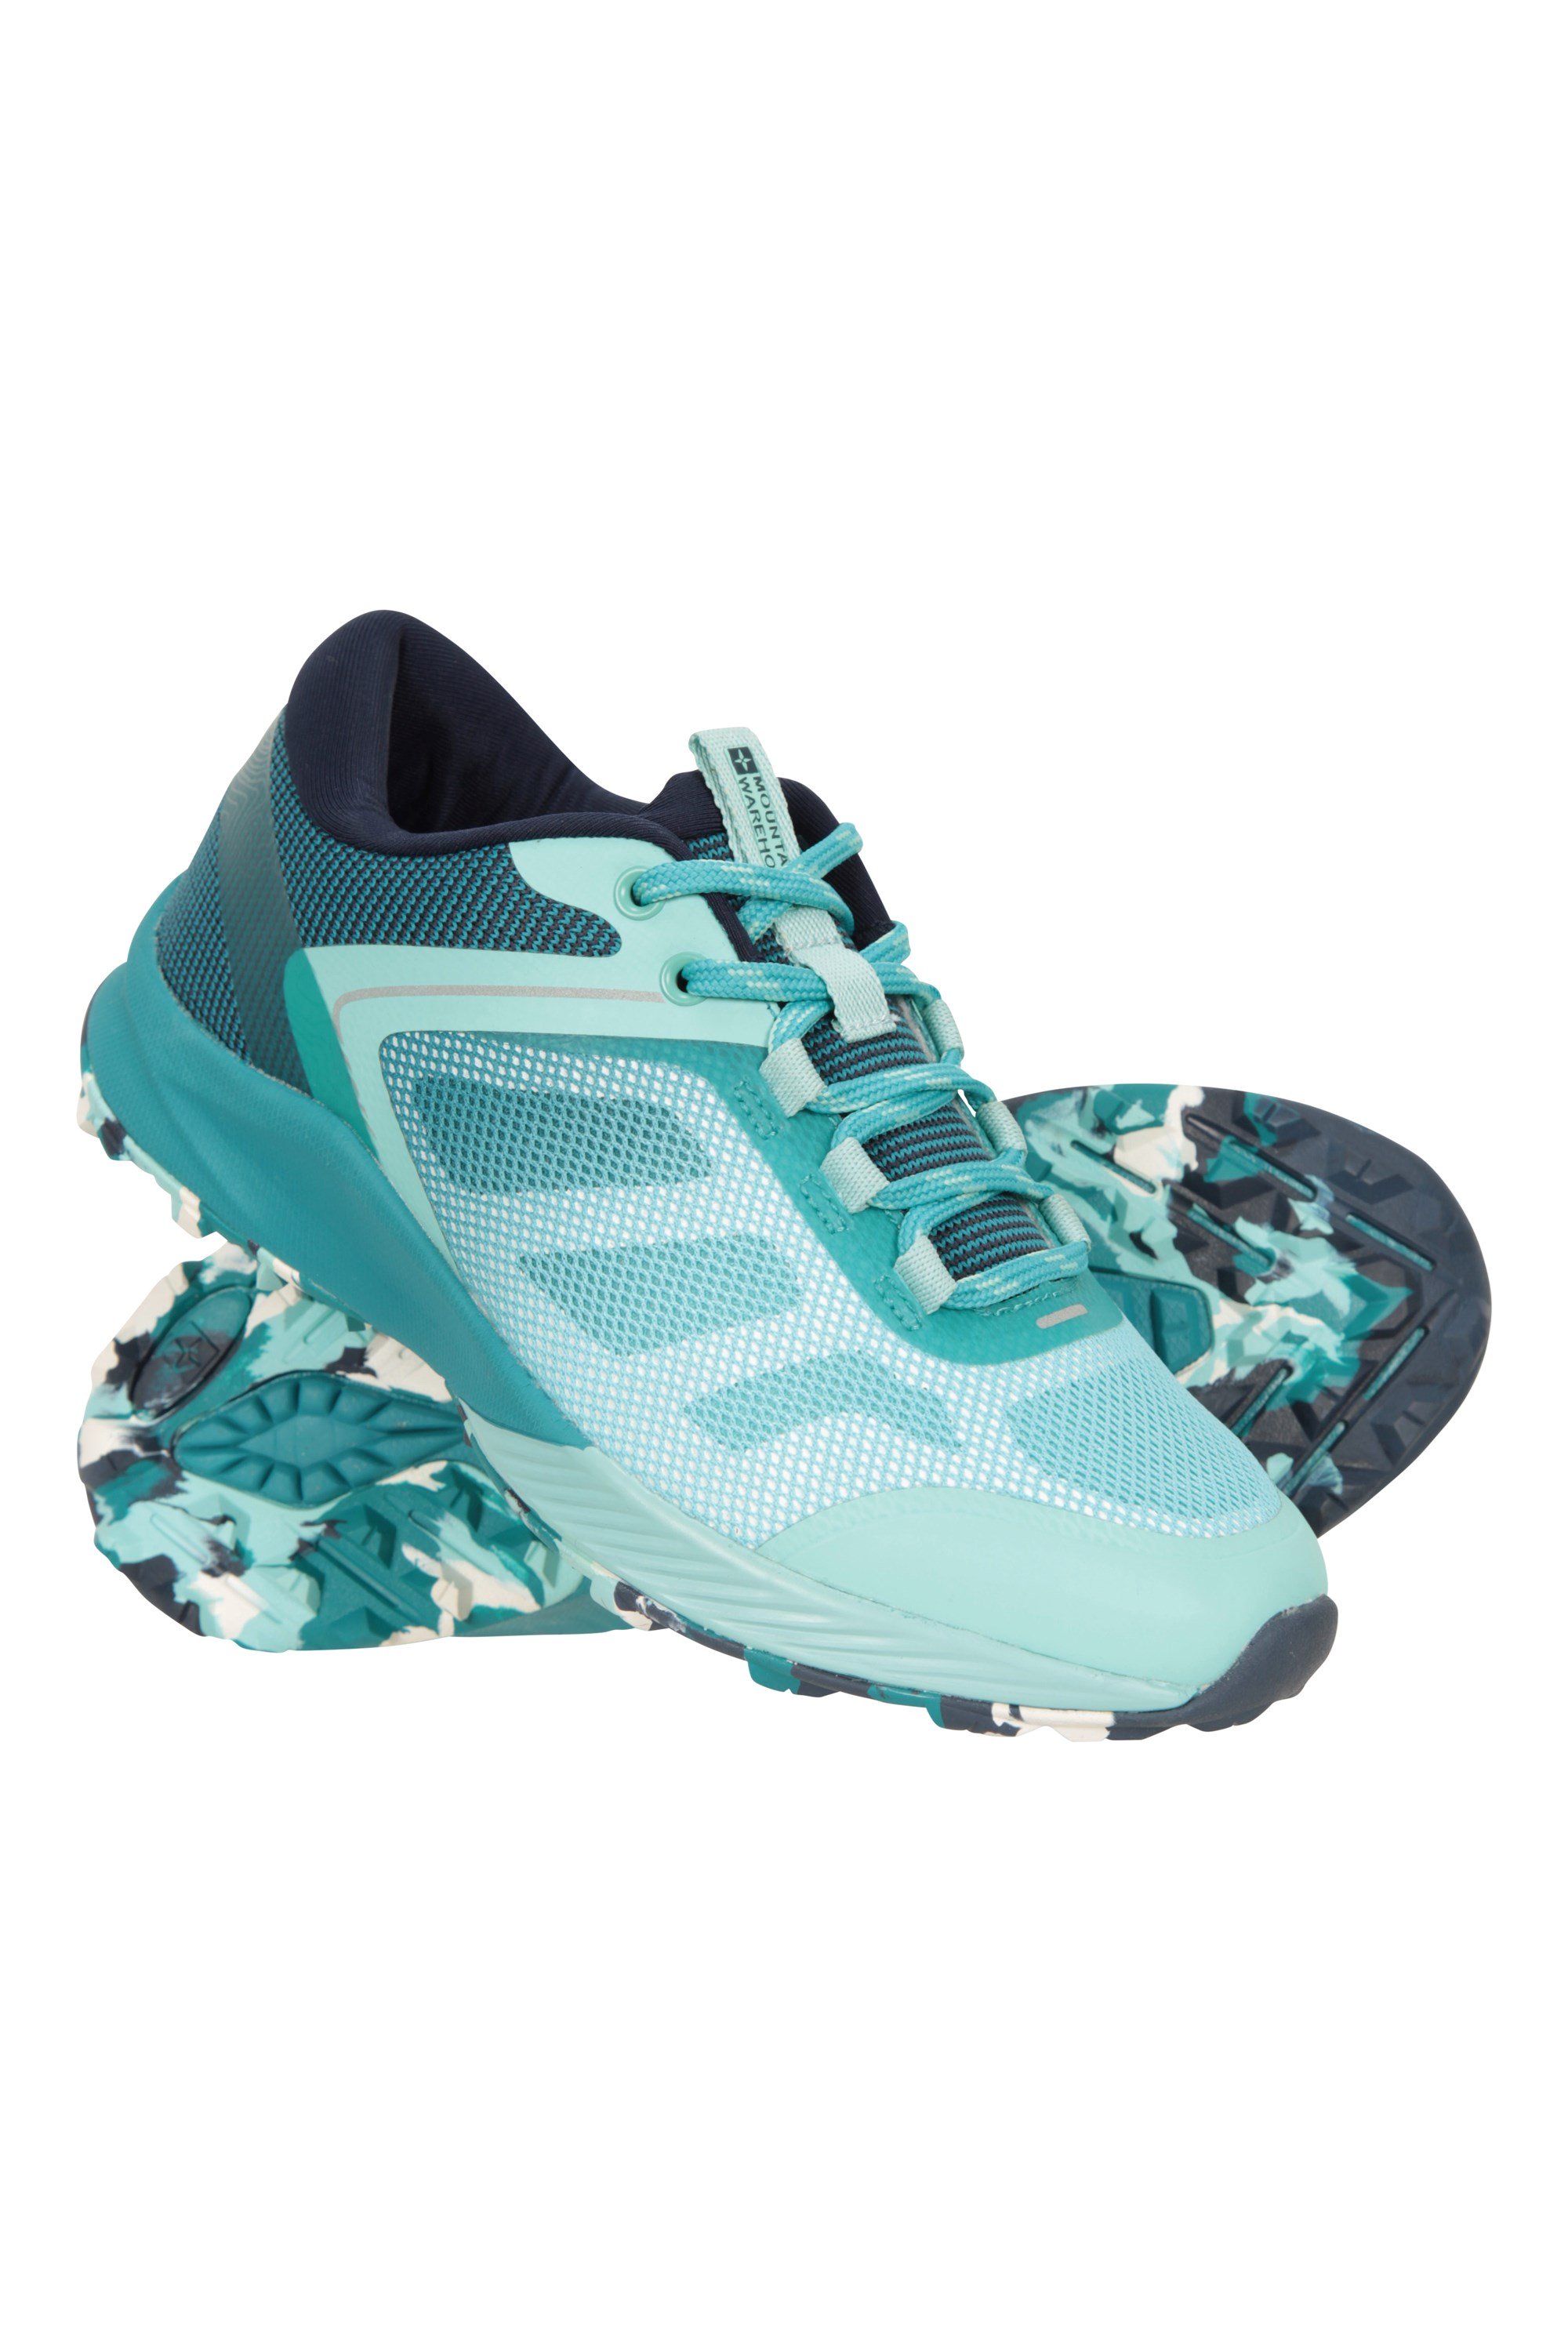 Active Shoes & Trainers | Mountain Warehouse GB